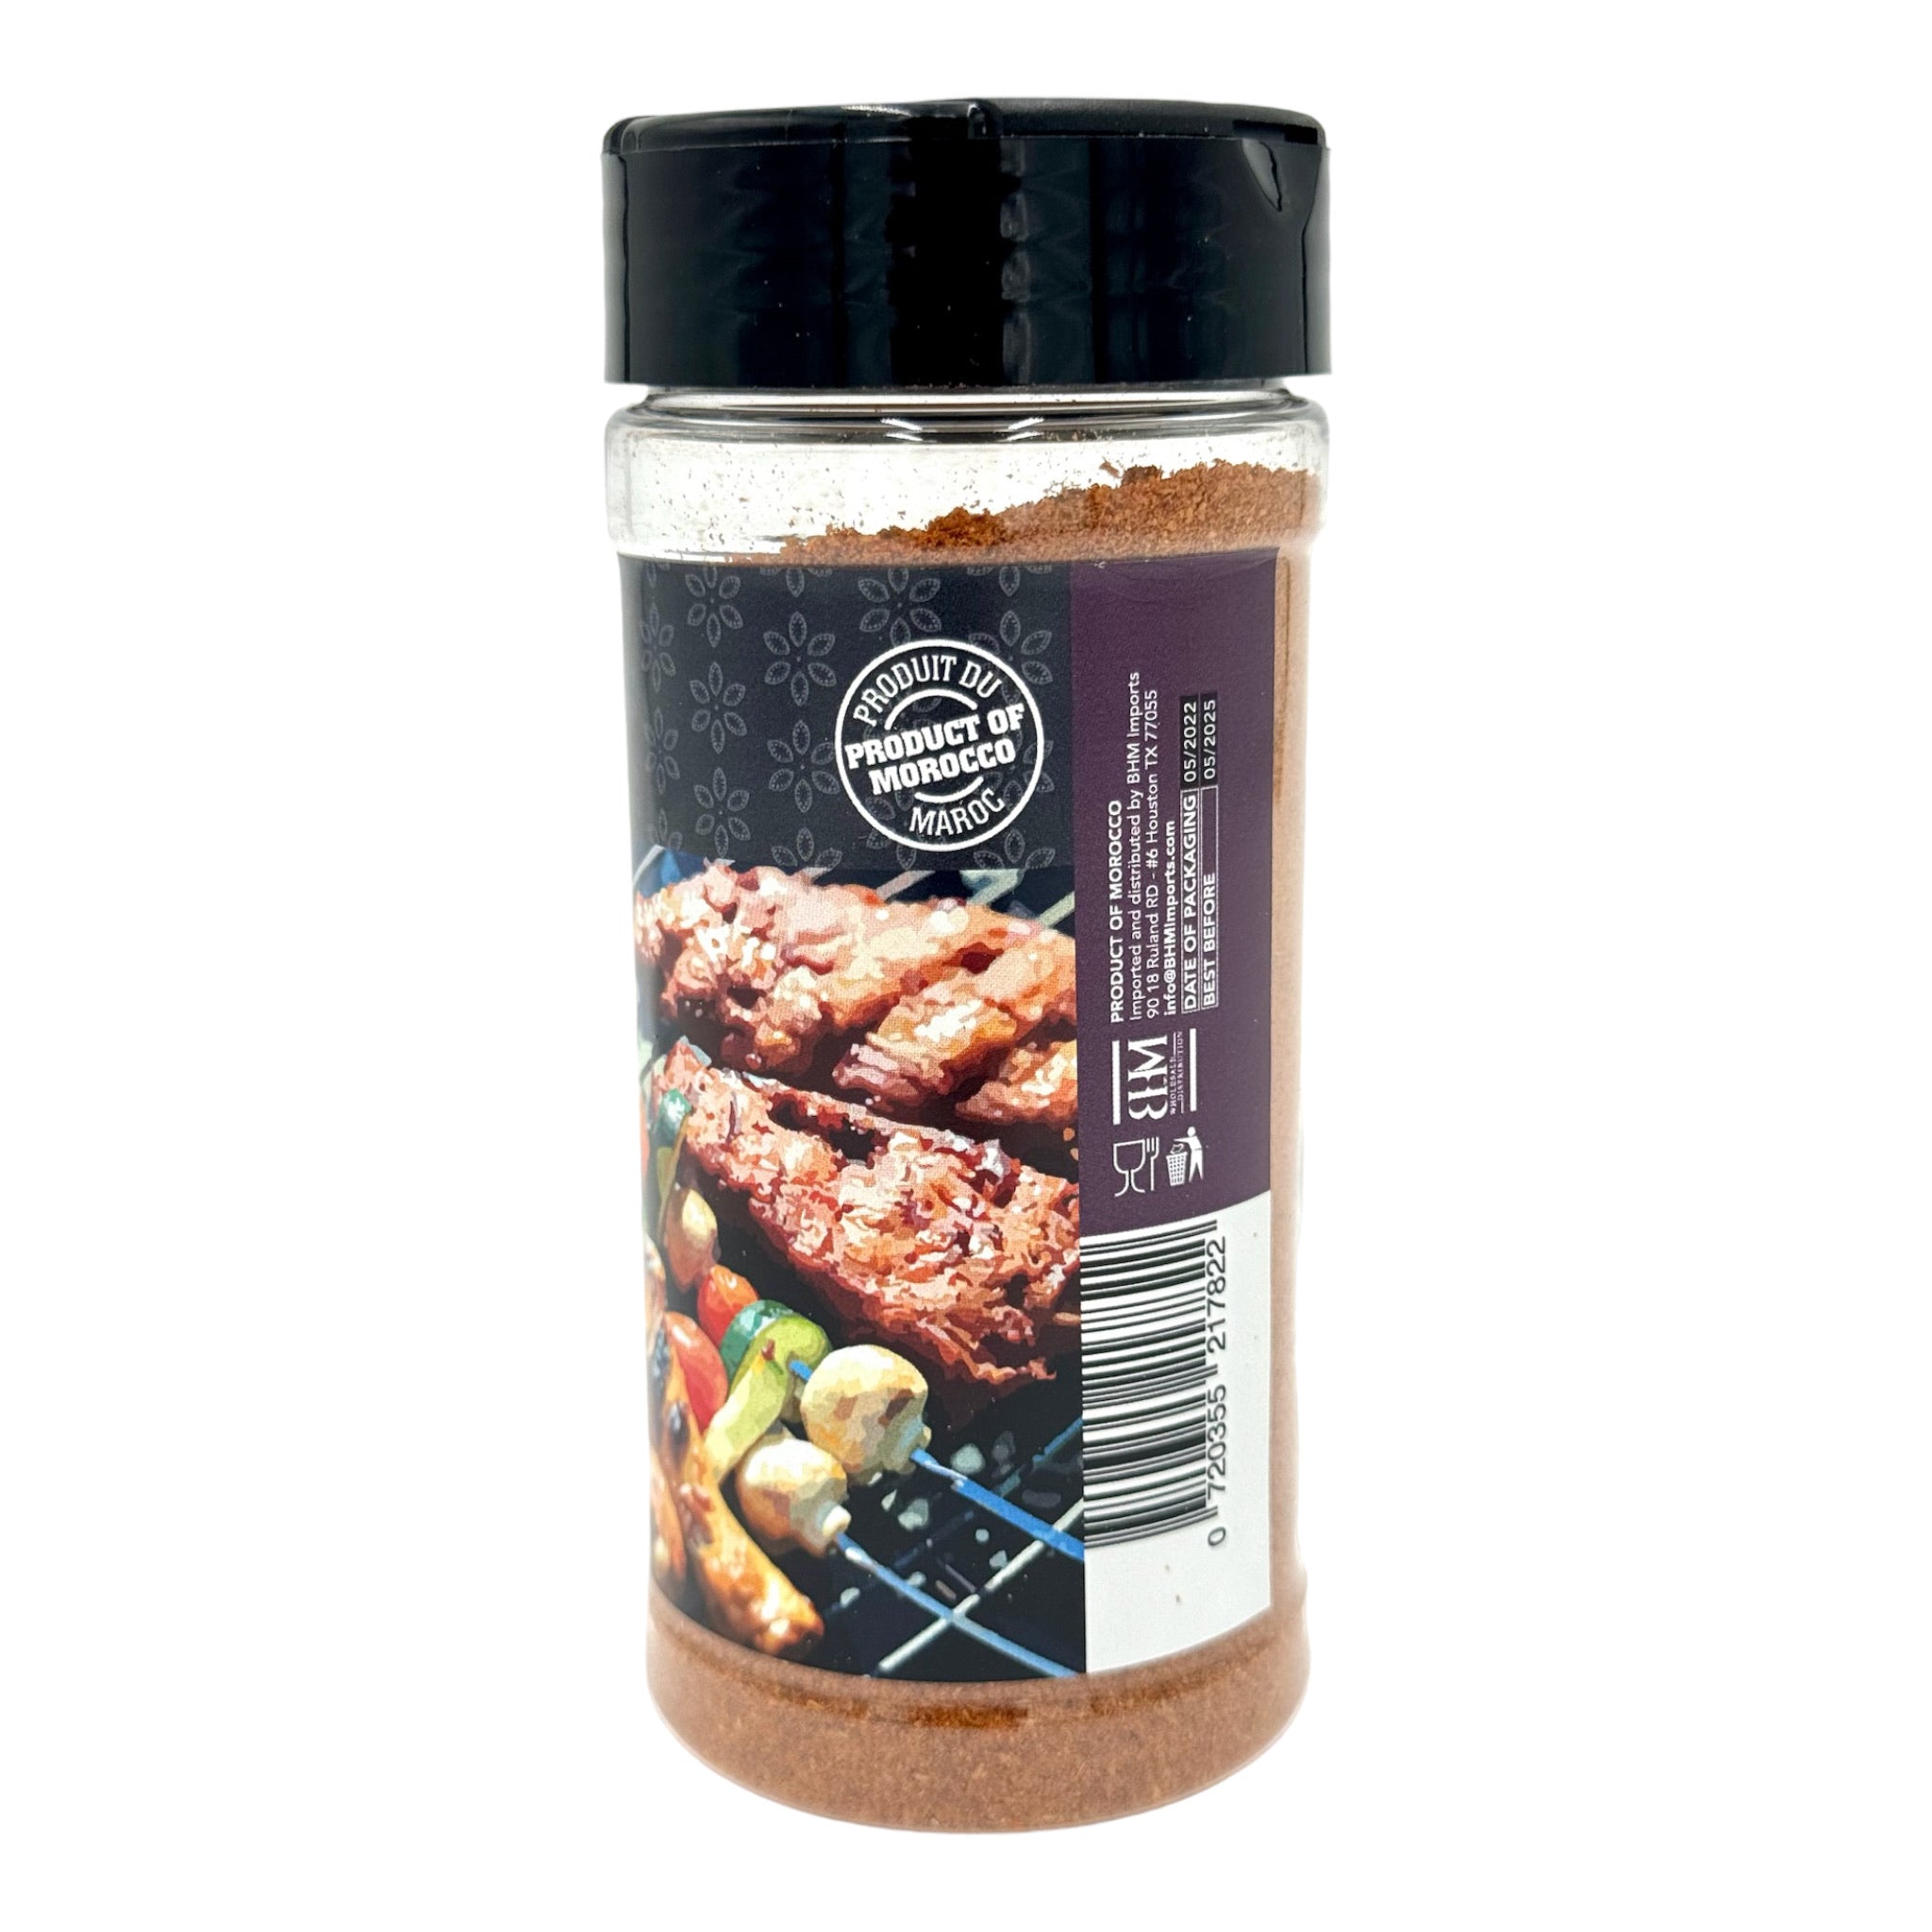 Moroccan Grill Spice Blend by Mazyana Brand